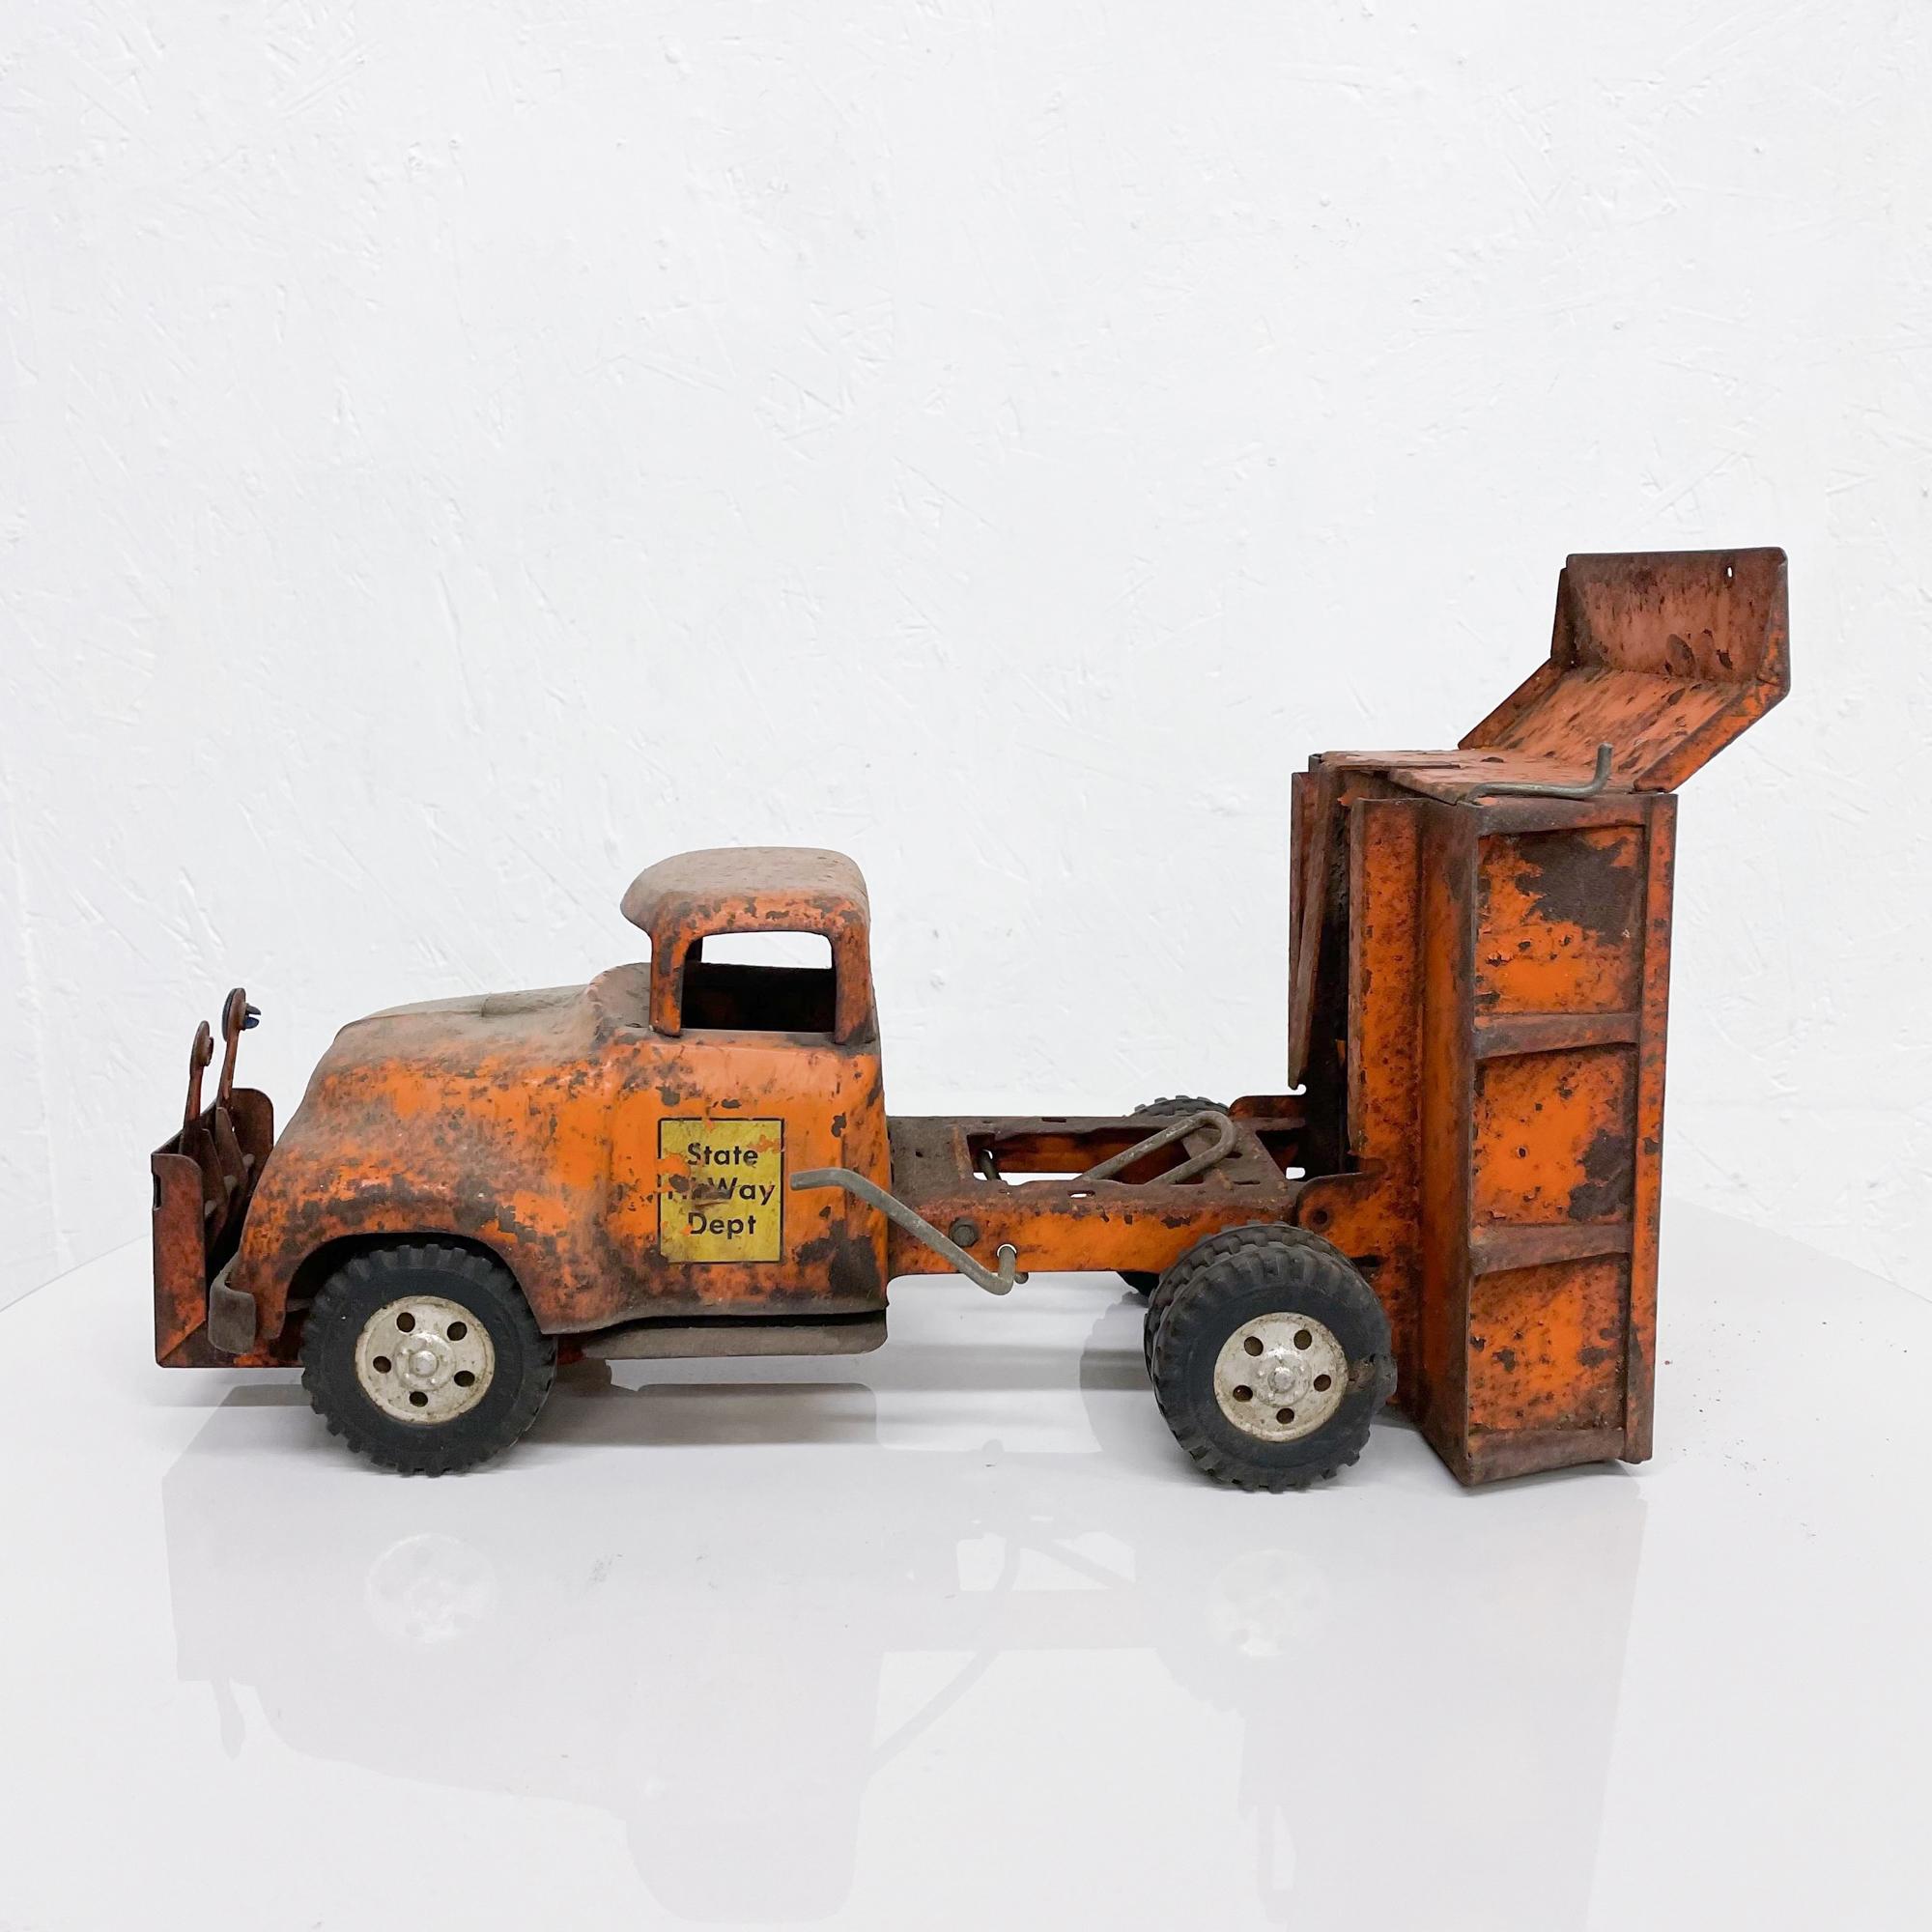 Vintage toy truck stamped state highway hi-way construction made by TONKA in 1956.
Big dump truck painted in orange. Rusted metal. Big rubber tires. Super cool.
Measures: 14 L x 6.25 W x 6.5 tall
Original unrestored vintage condition. Distressed